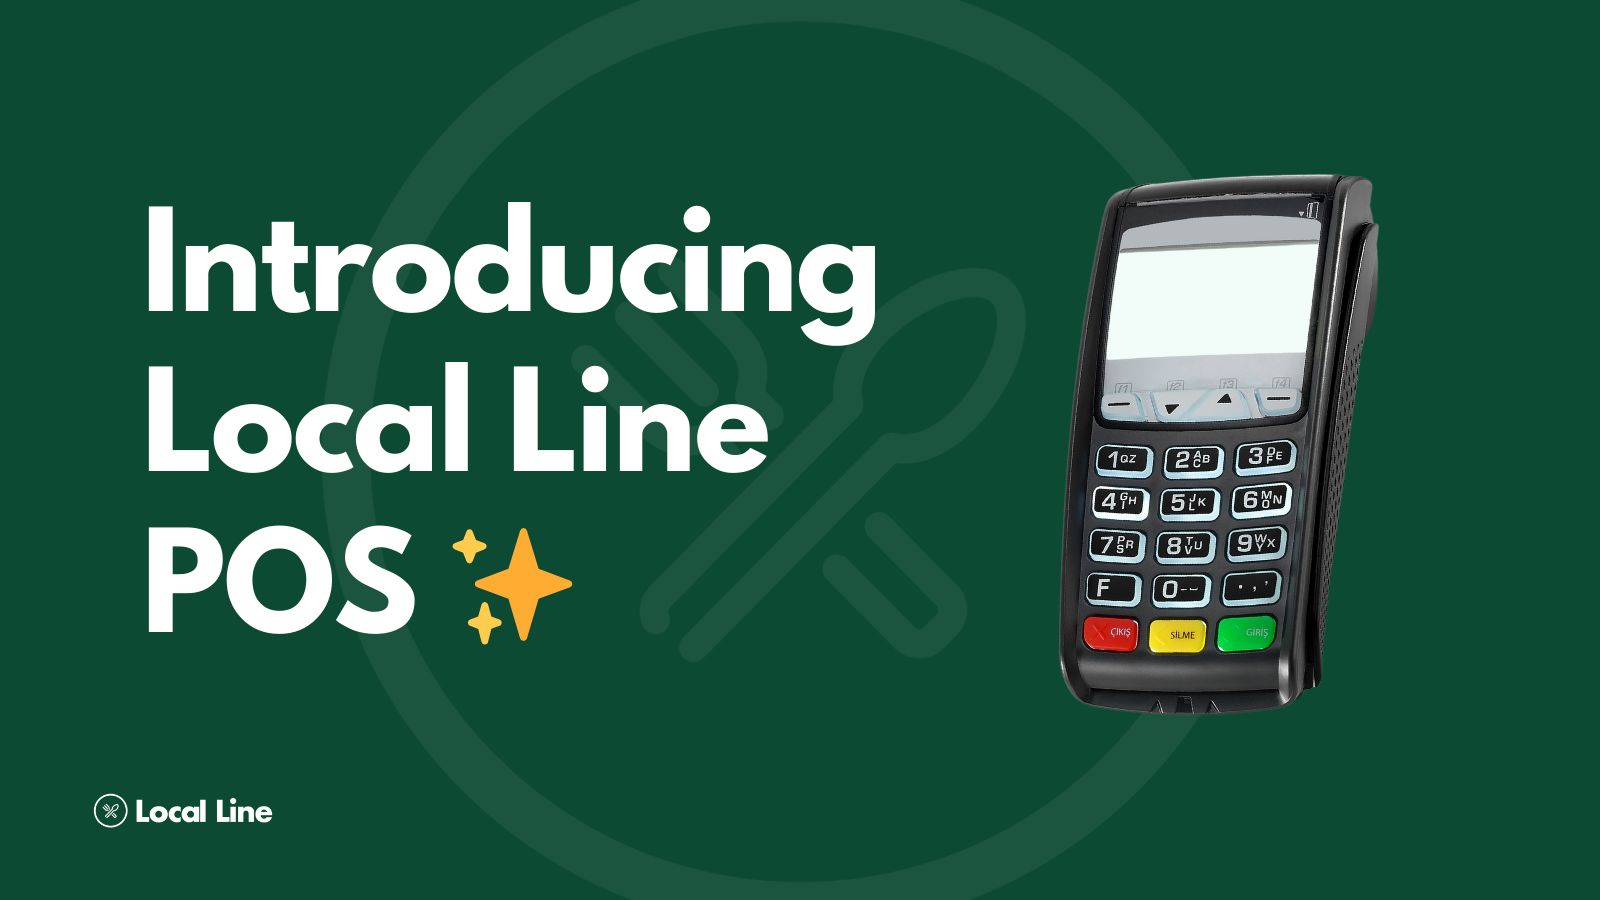 Local Line launches new pos feature for farms and food hubs